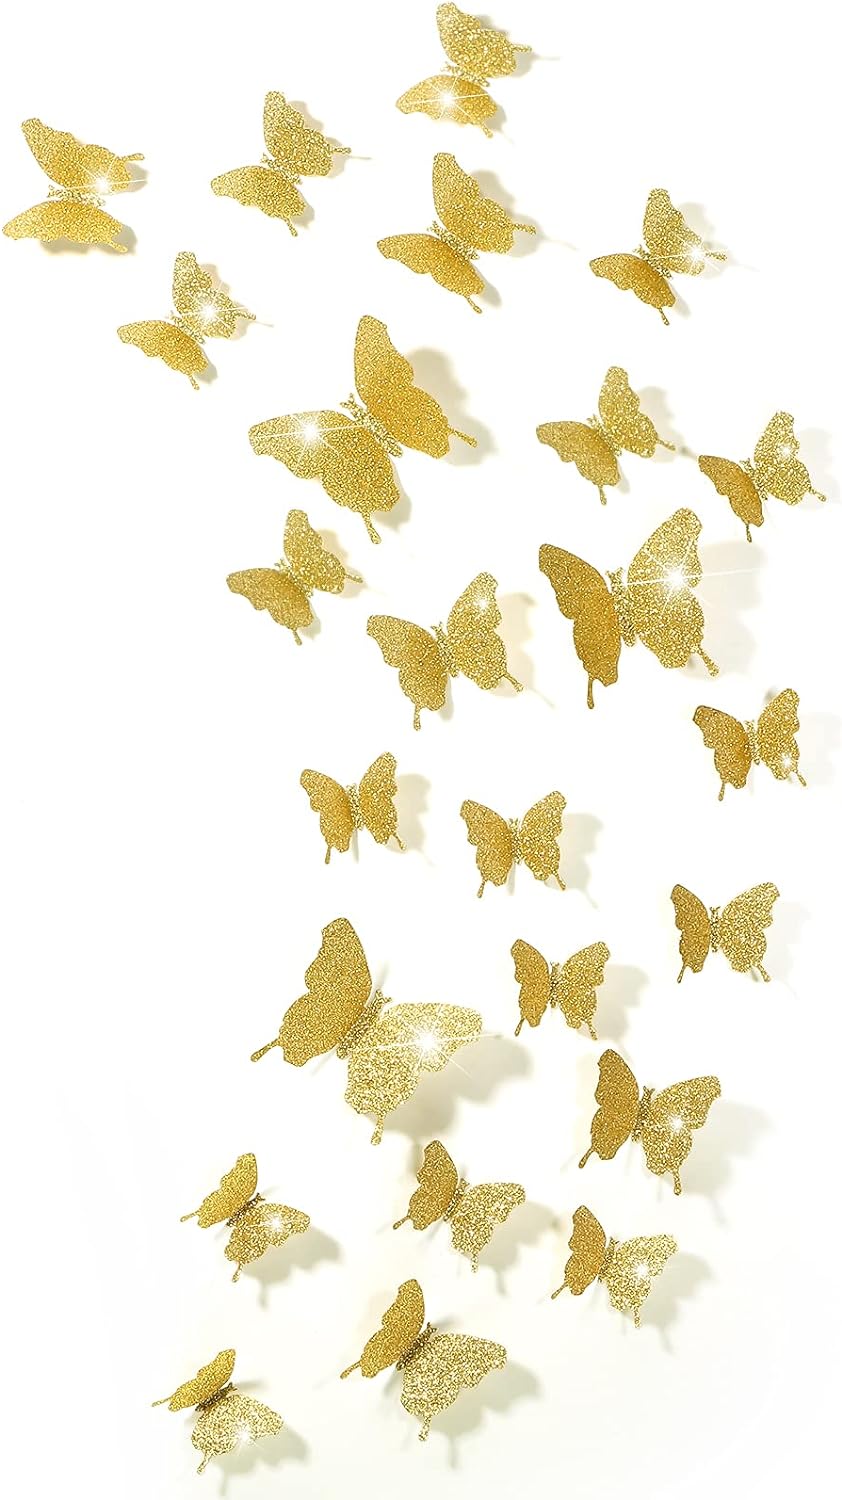 48 Pieces Butterfly Wall Decor DIY Mirror 3D Butterfly Stickers Removable Butterfly Decals for Home Nursery Classroom Kids Bedroom Bathroom Living Room Decor (Glitter Gold)